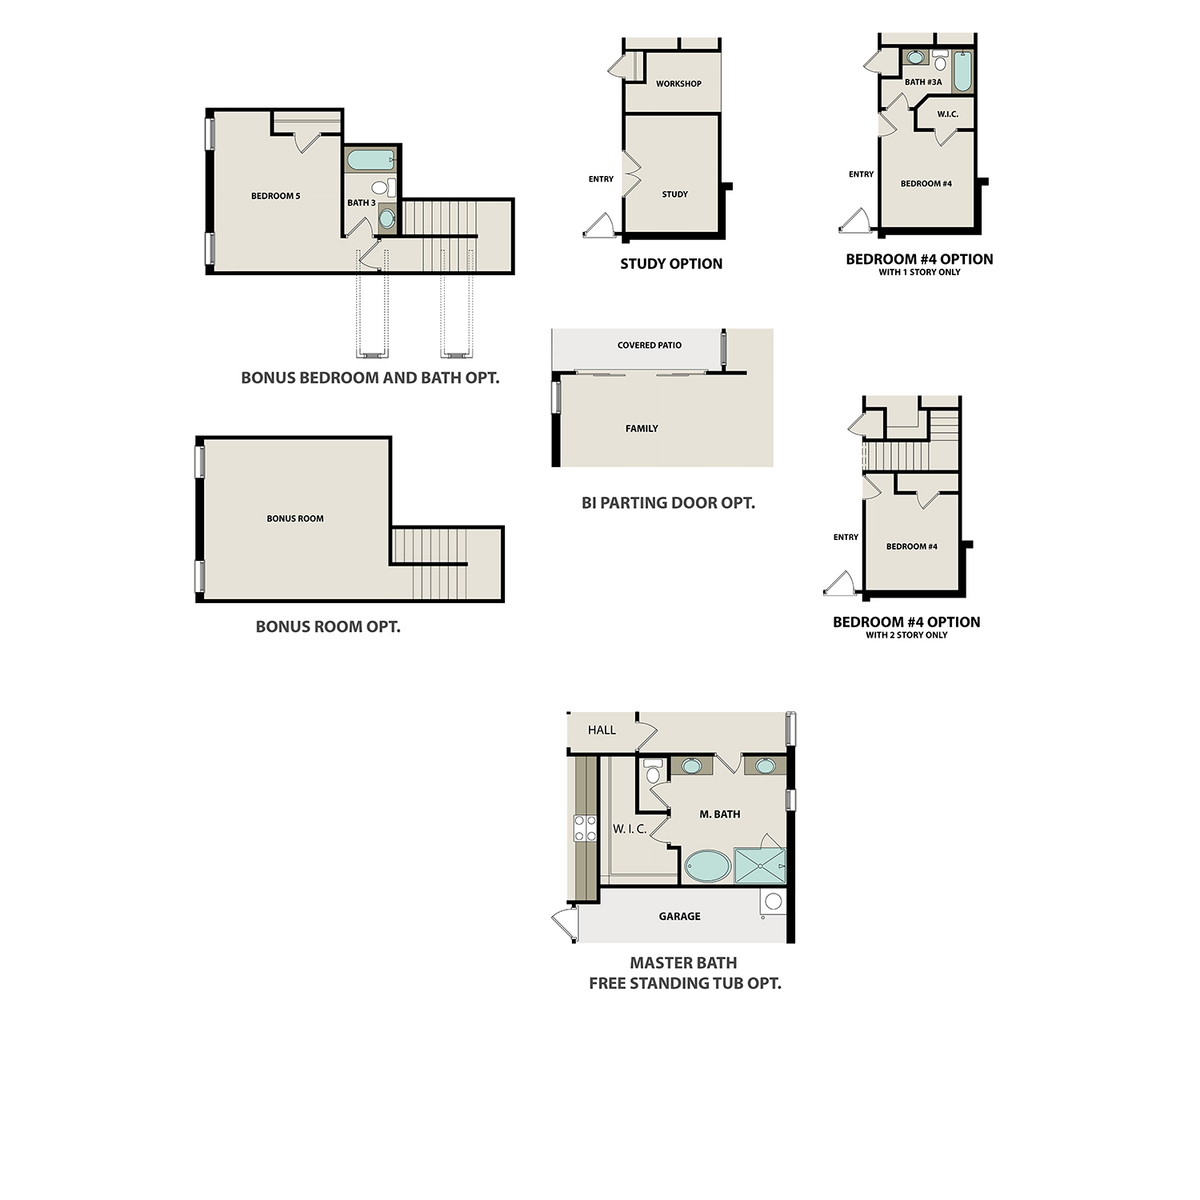 4 - The Ansley B with Bonus buildable floor plan layout in Davidson Homes' Carellton community.